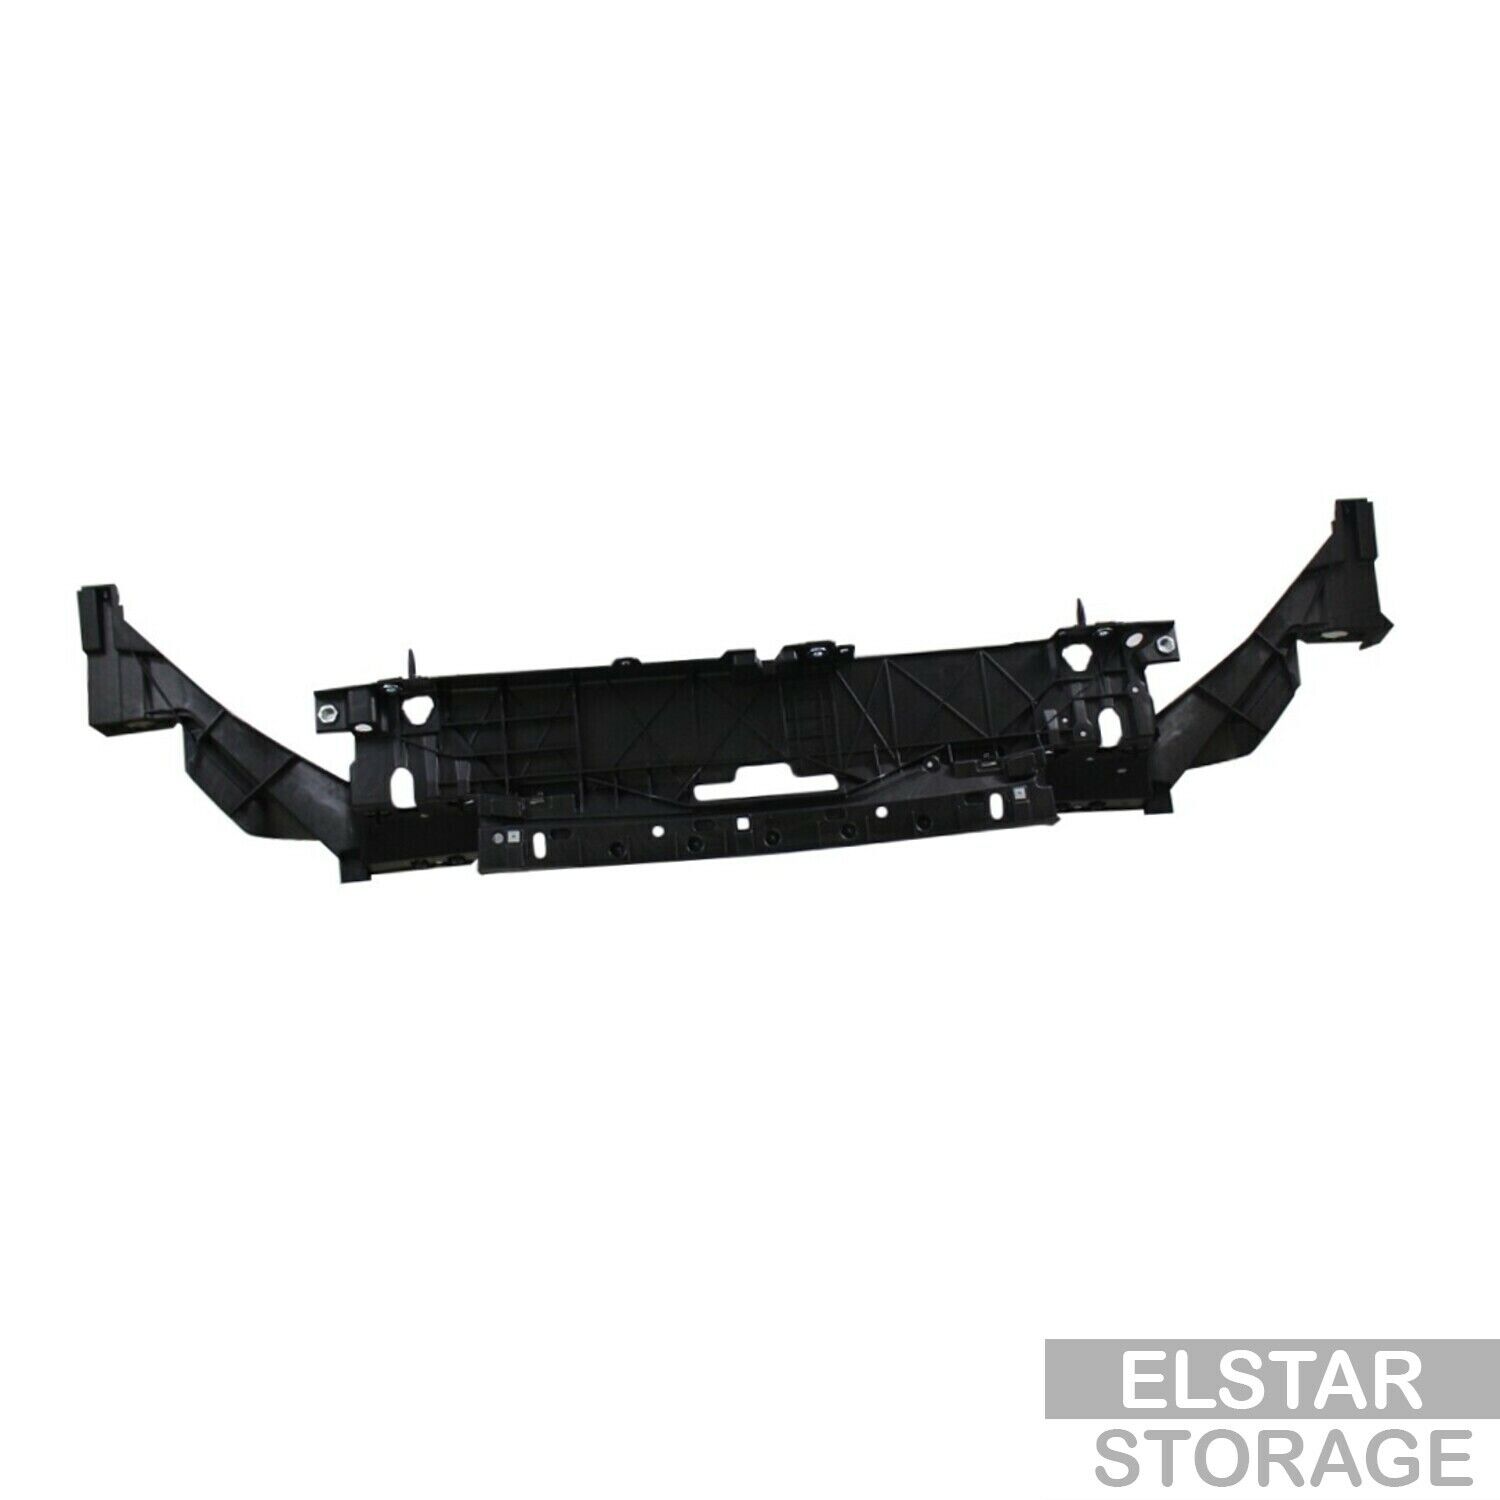 Header Panel Support Replacement Fit 13-16 Ford Fusion 4 Door Sedan